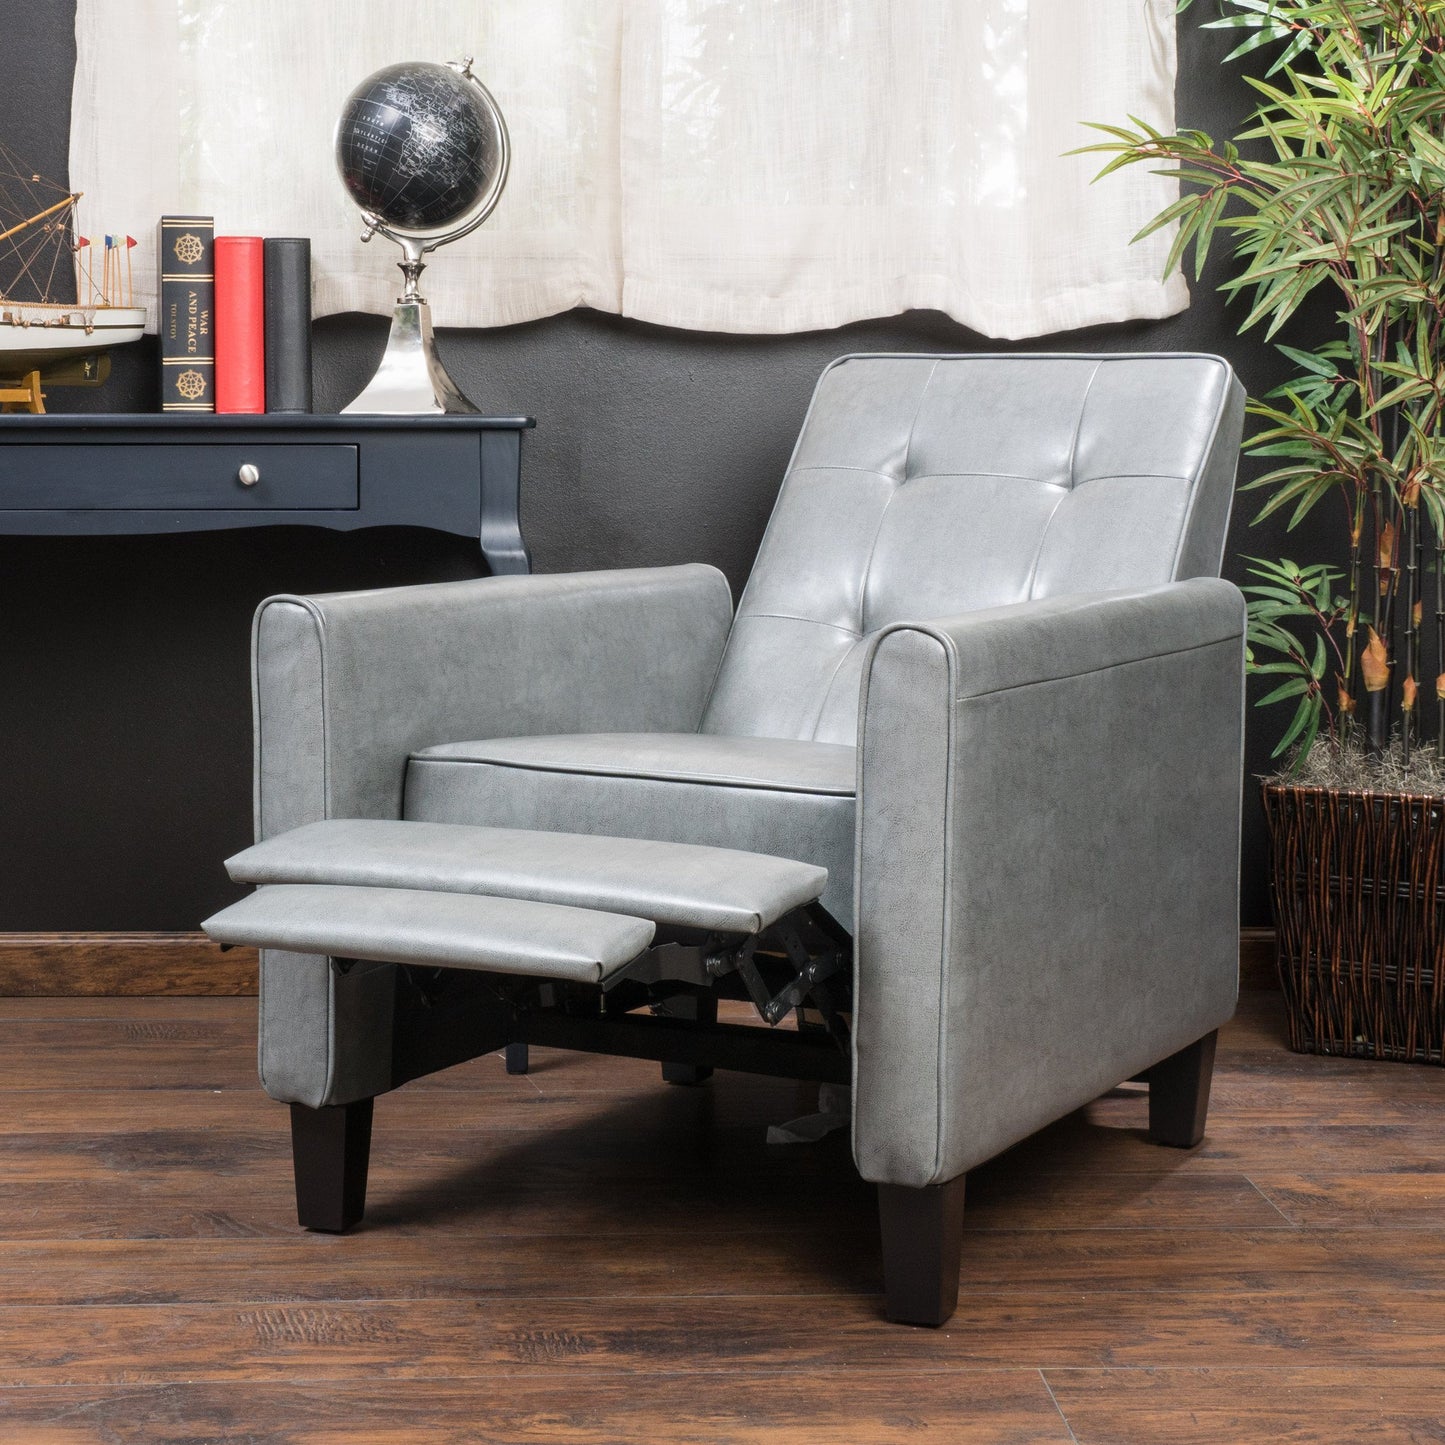 Elan Contemporary Tufted Dark Gray Bonded Leather Recliner with Tapered Legs